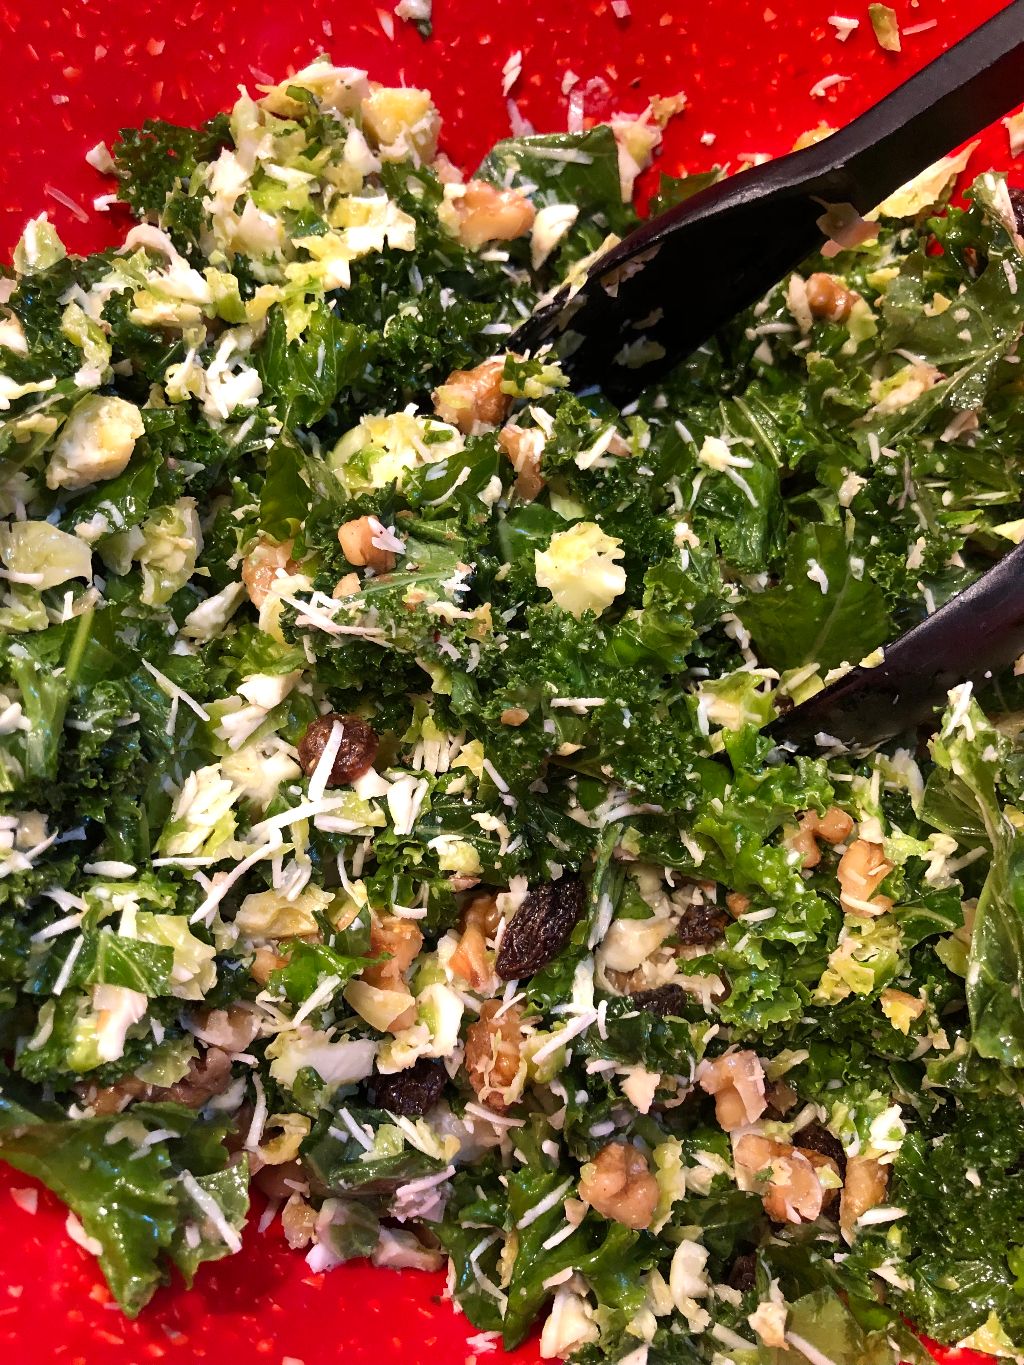 Kale & Brussels Sprout Salad with Walnuts, Parmesan & Lemon-Mustard ...